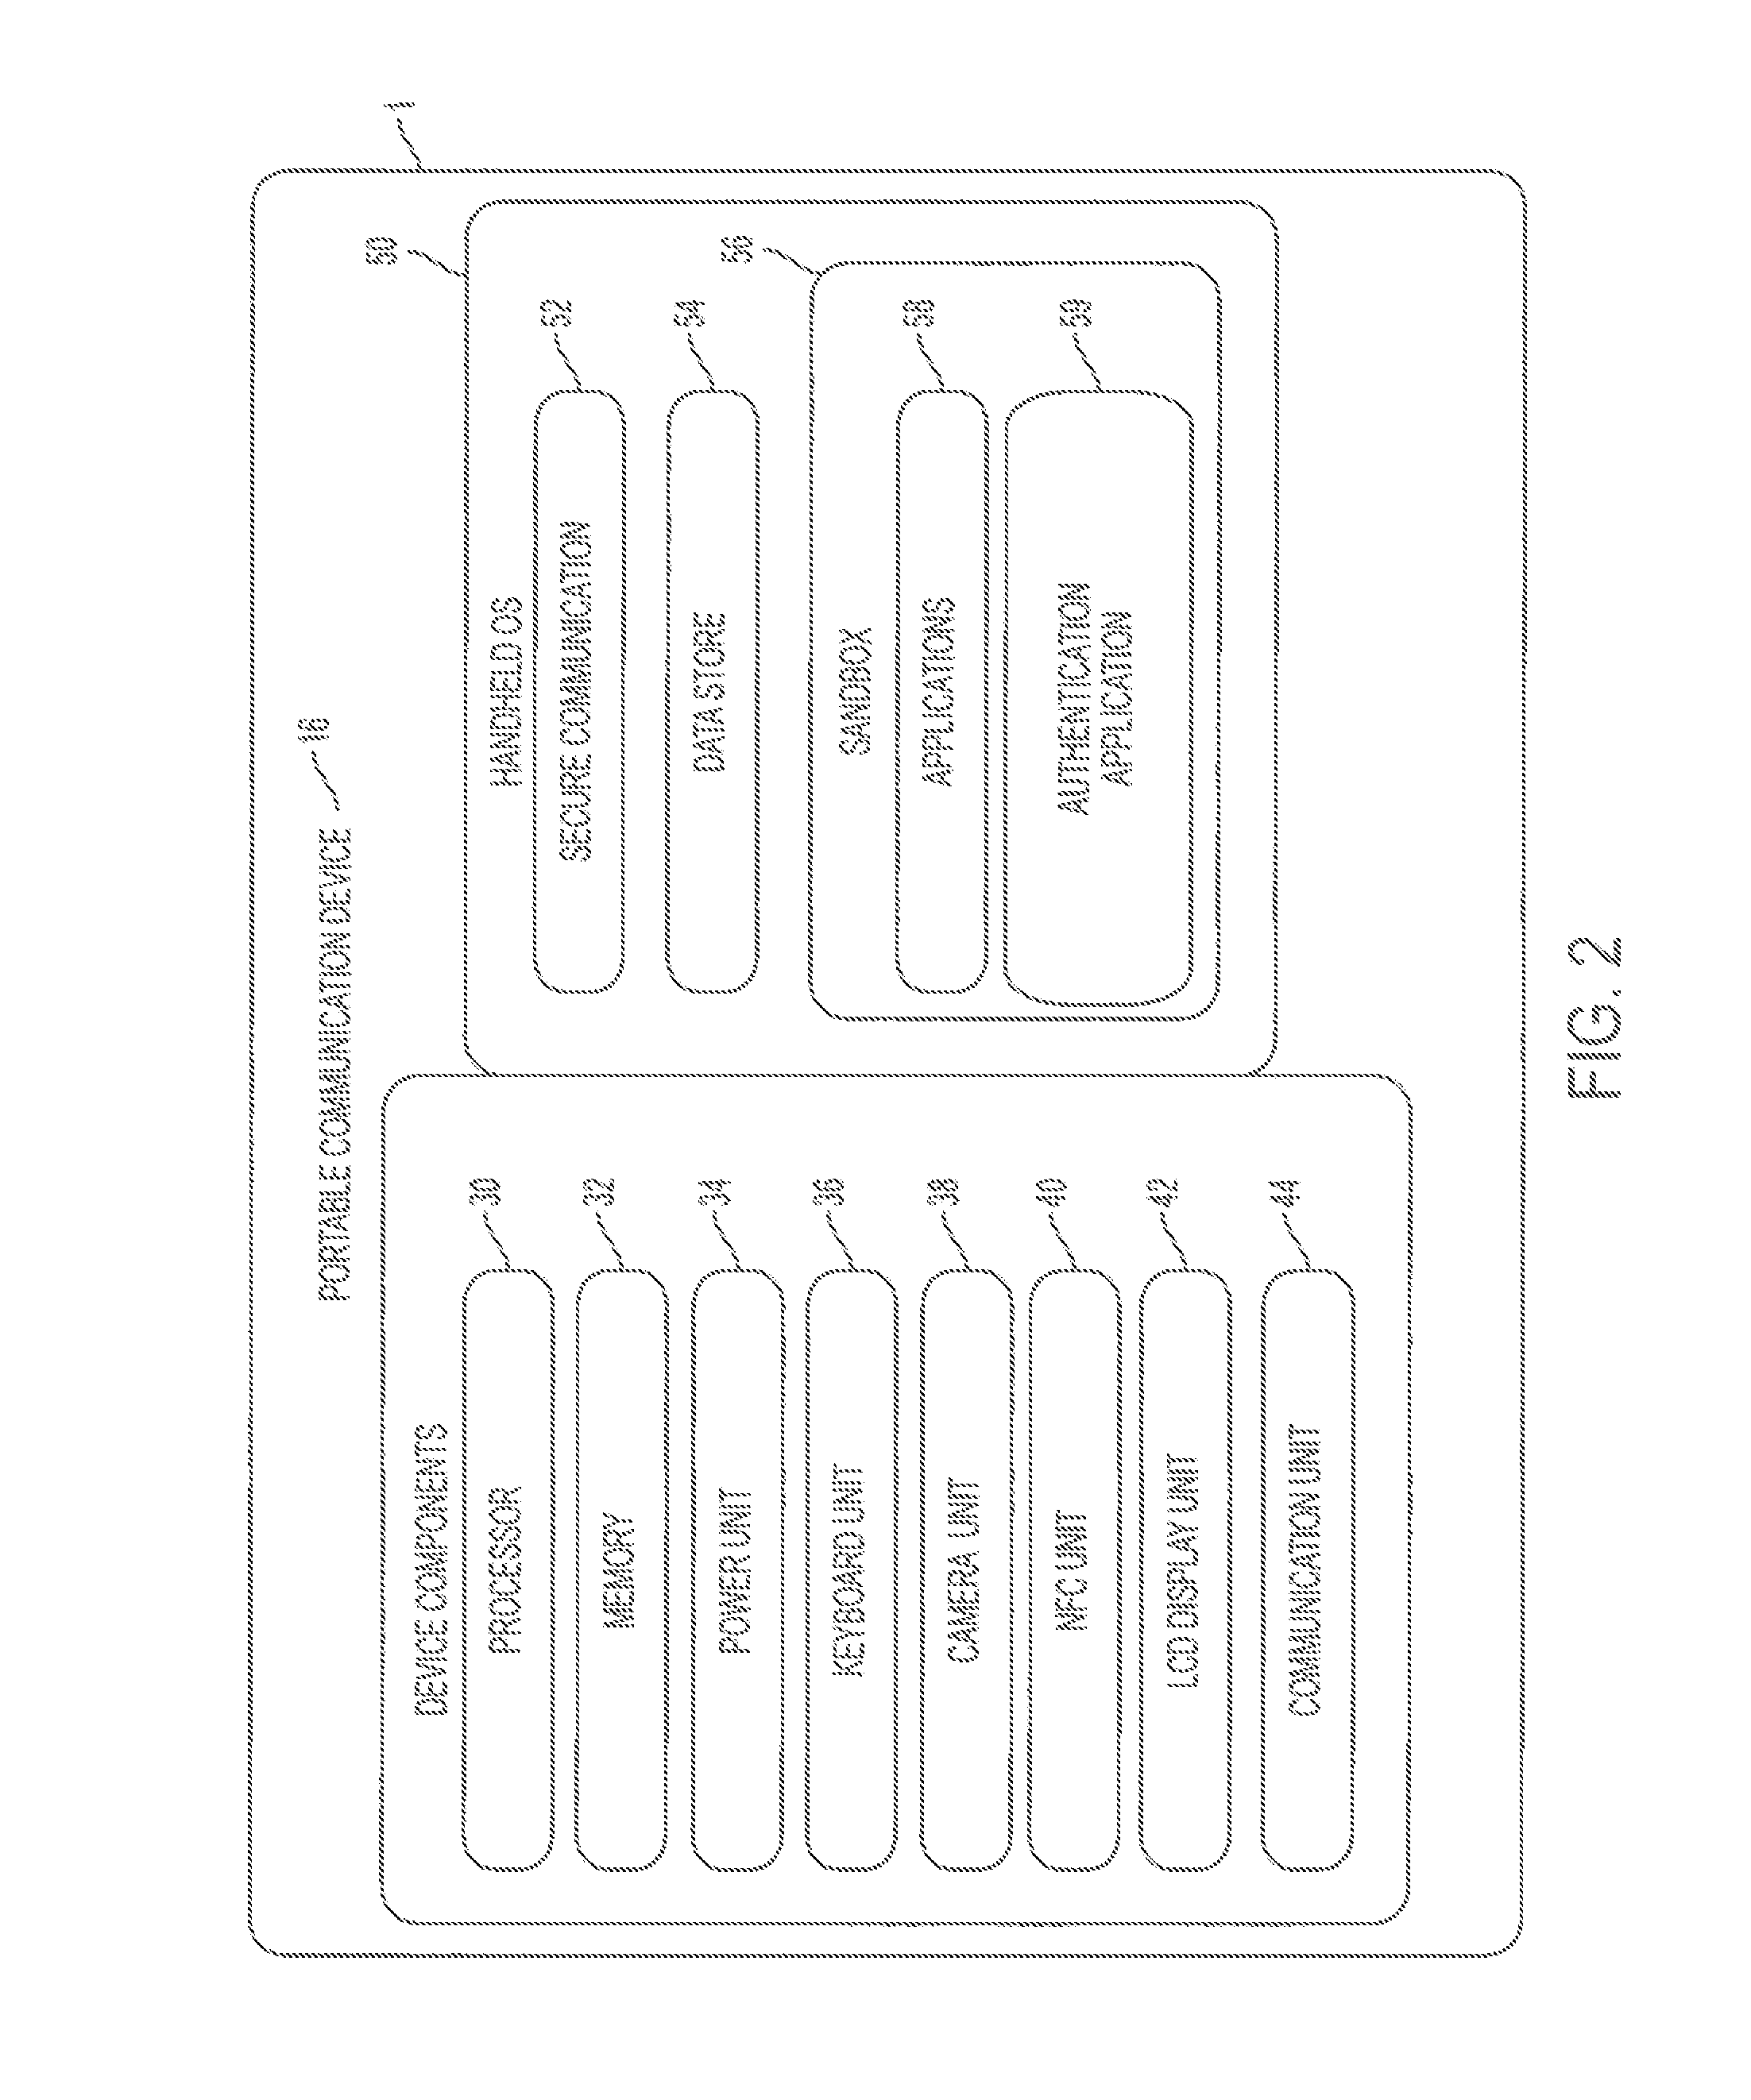 System, Design and Process for Easy to Use Credentials Management for Accessing Online Portals Using Out-of-Band Authentication